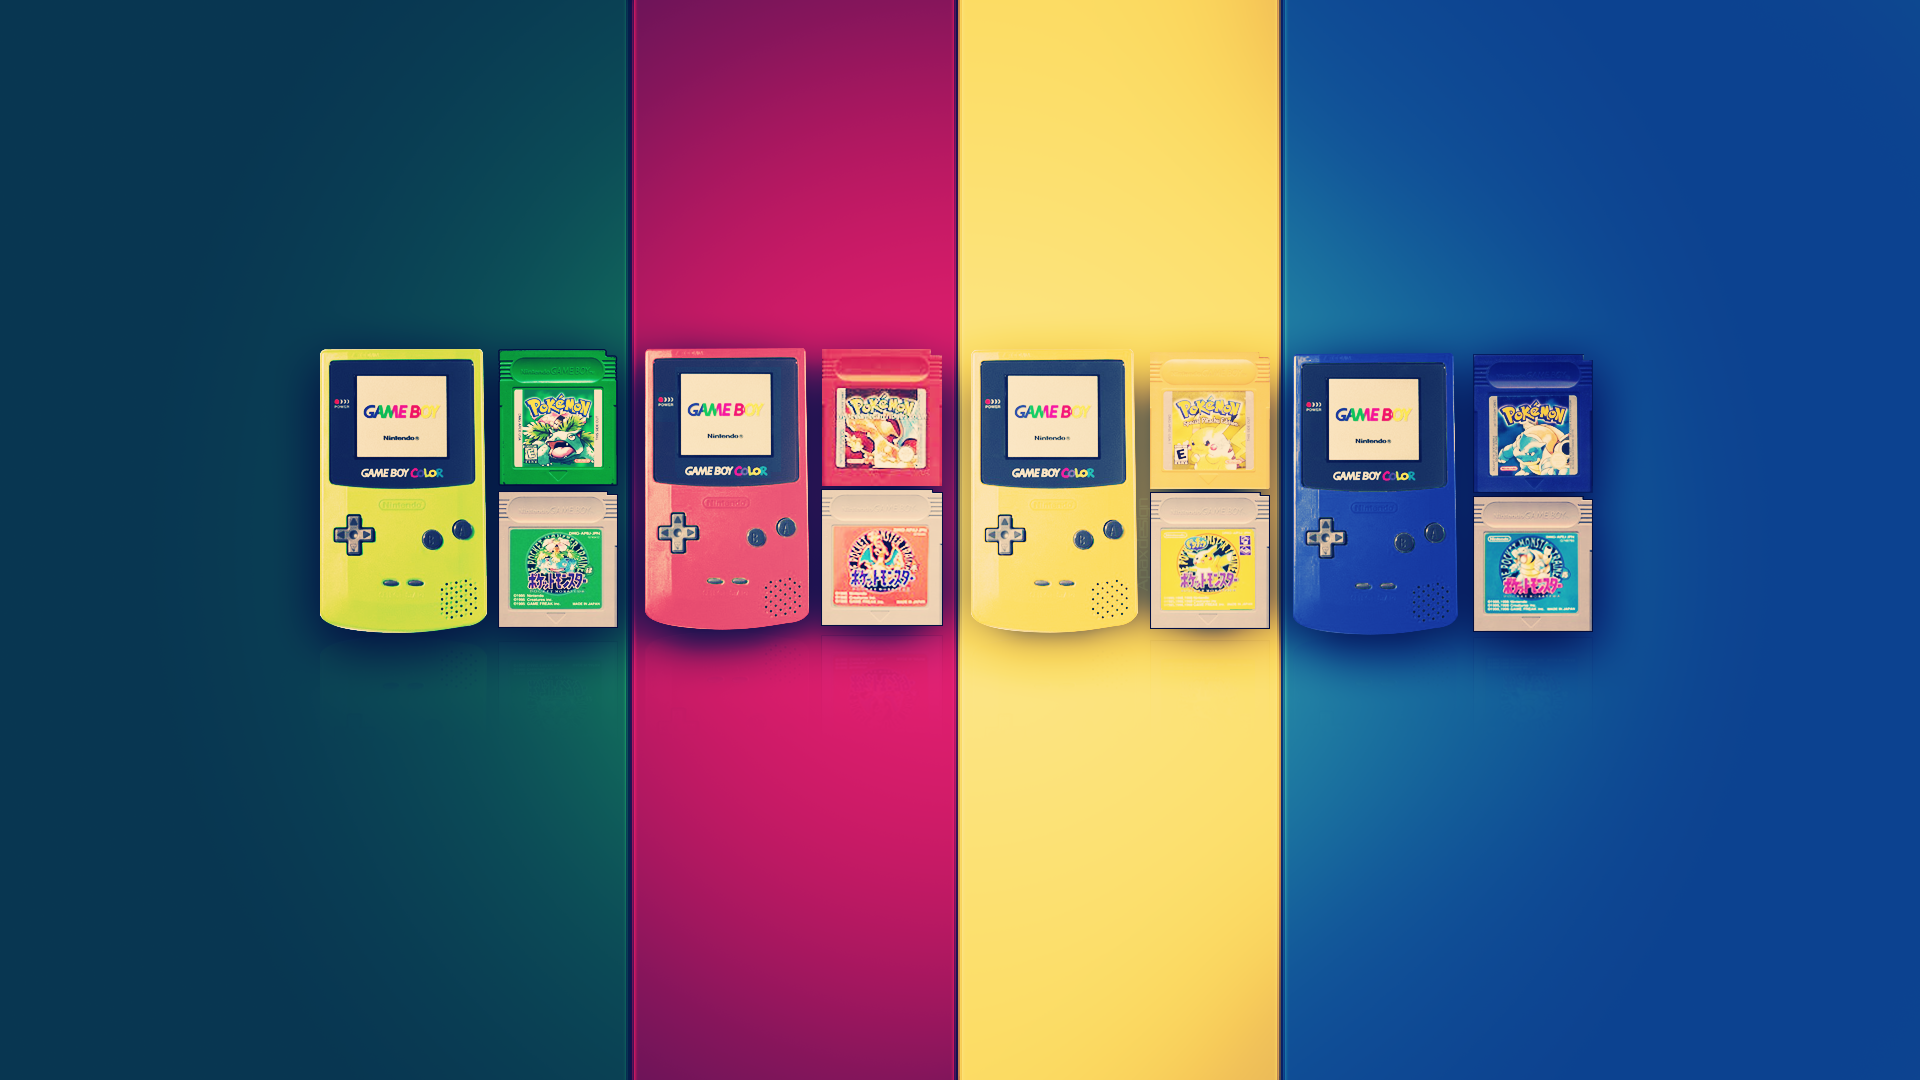 GameBoy Colorful Pokemon First Generation Video Games GameBoy Color Consoles Pokemon Digital Art Art 1920x1080